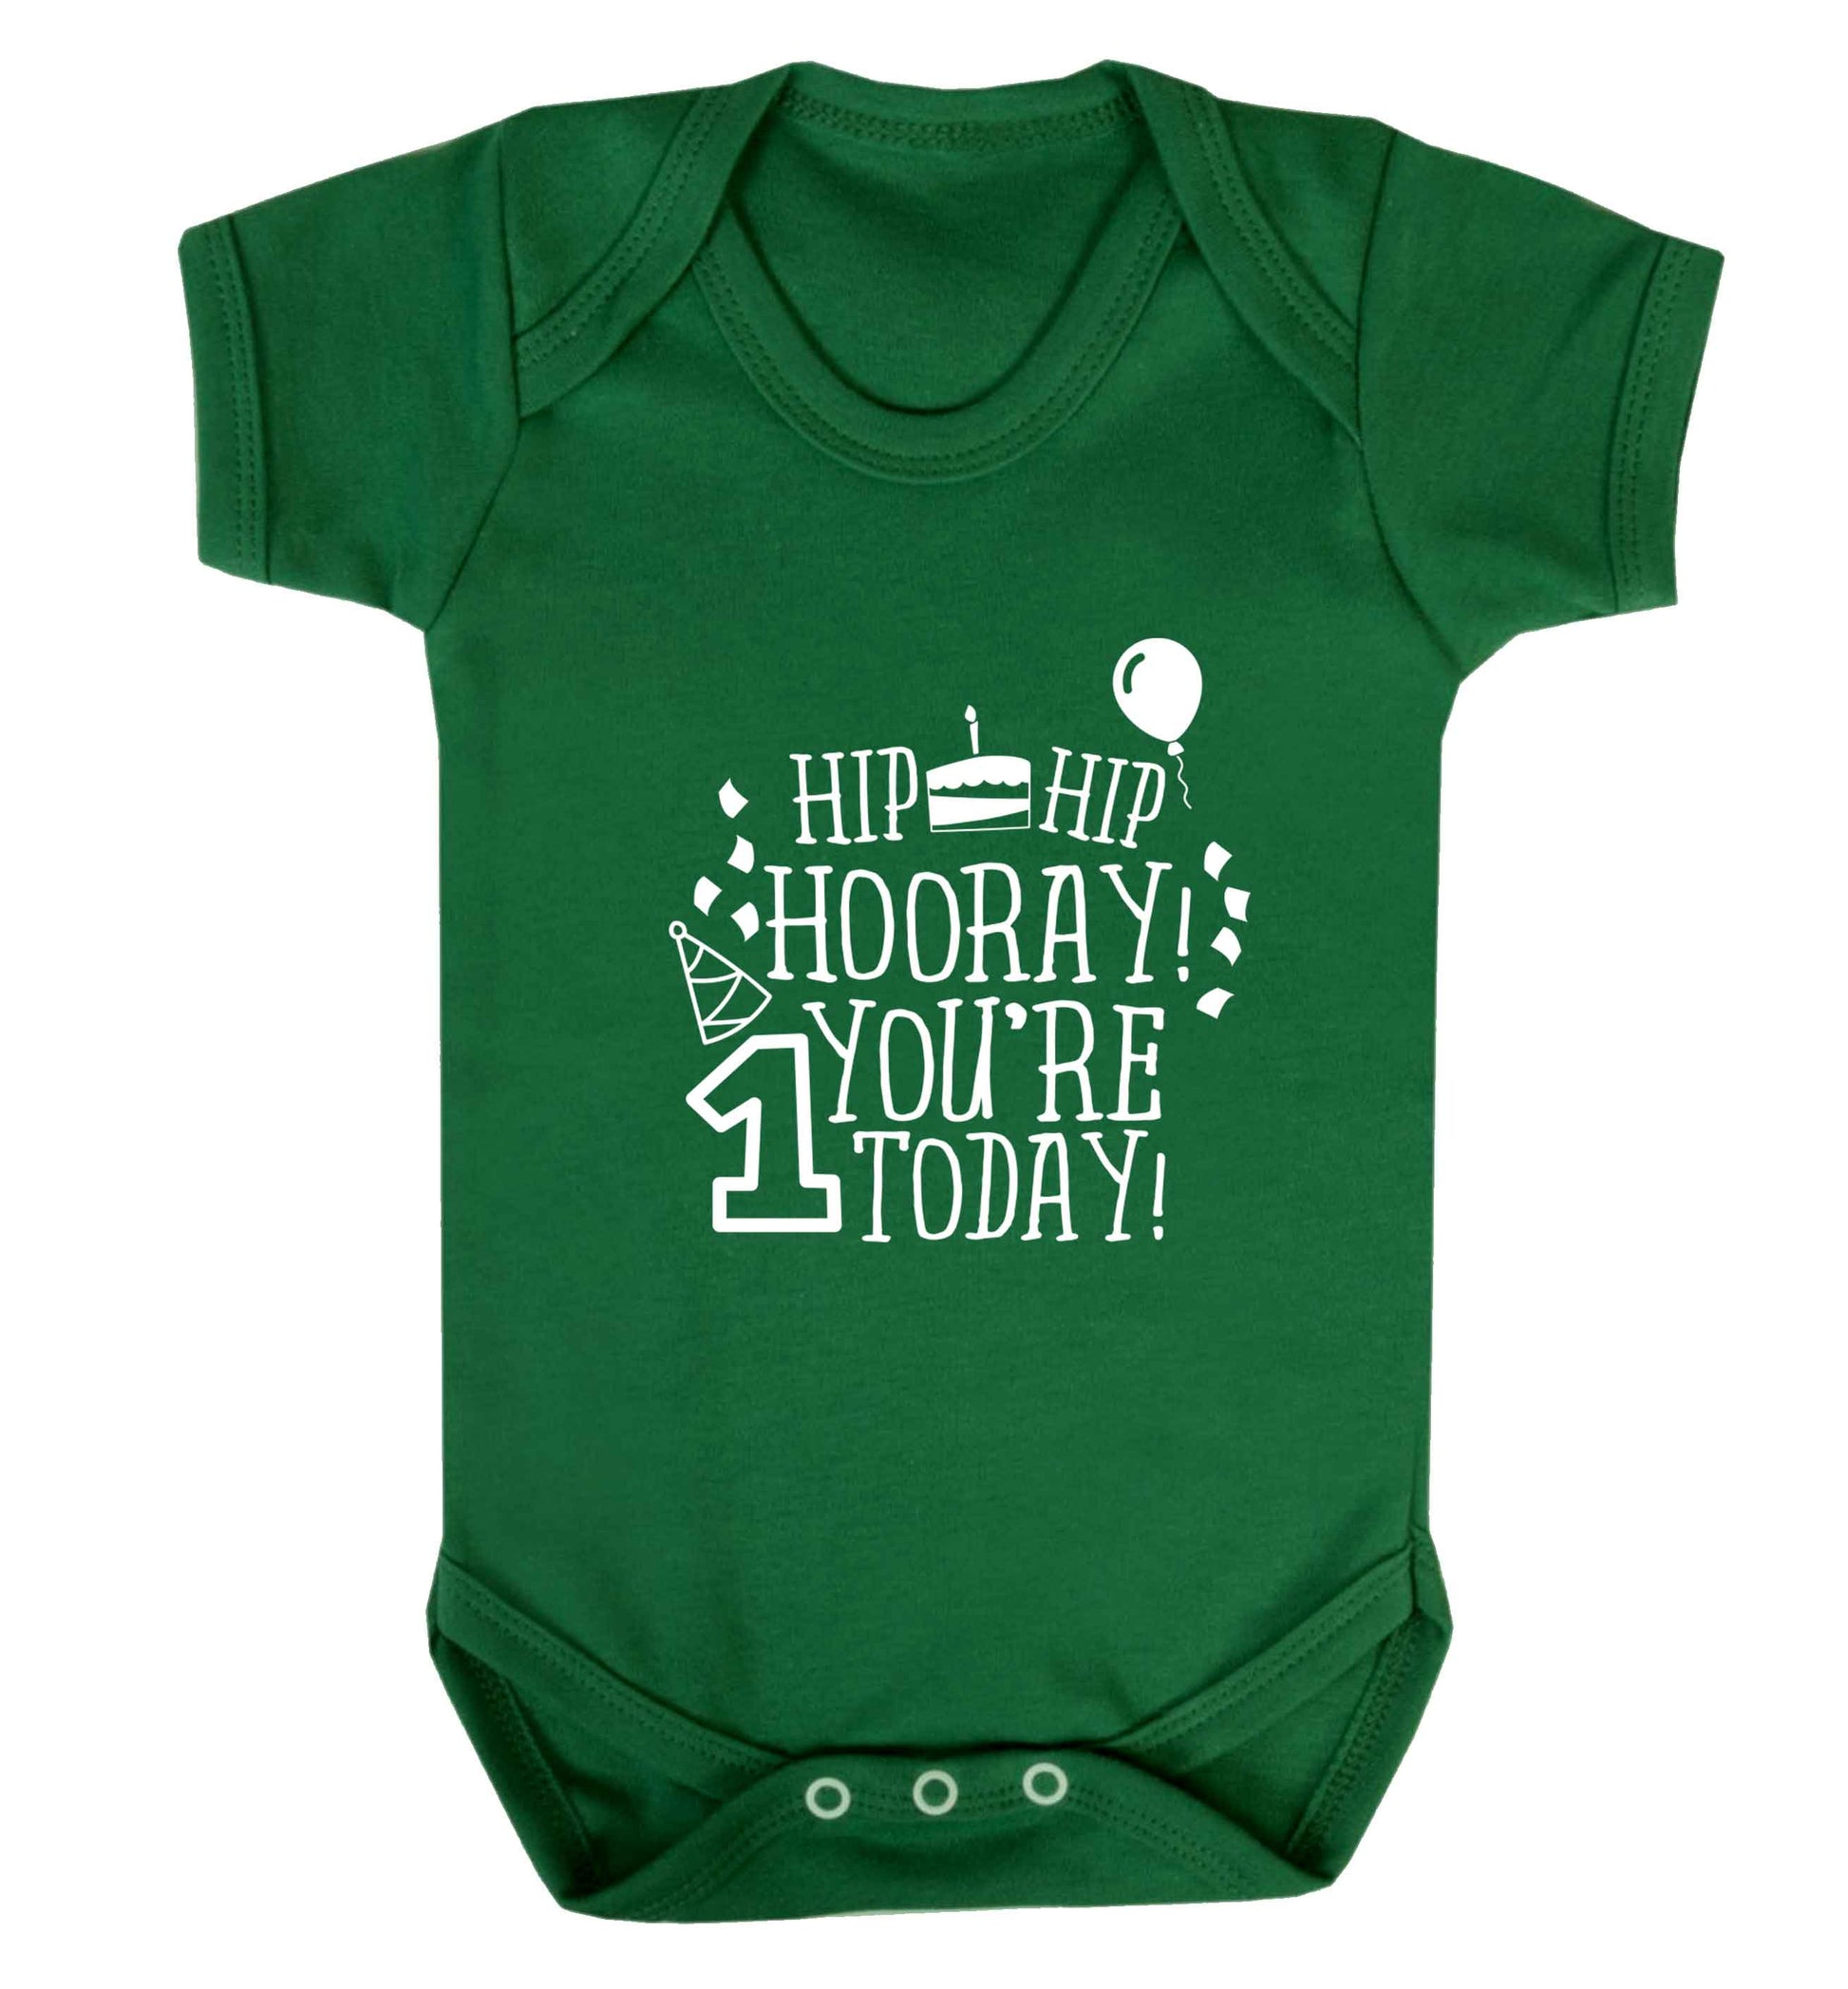 You're one today baby vest green 18-24 months